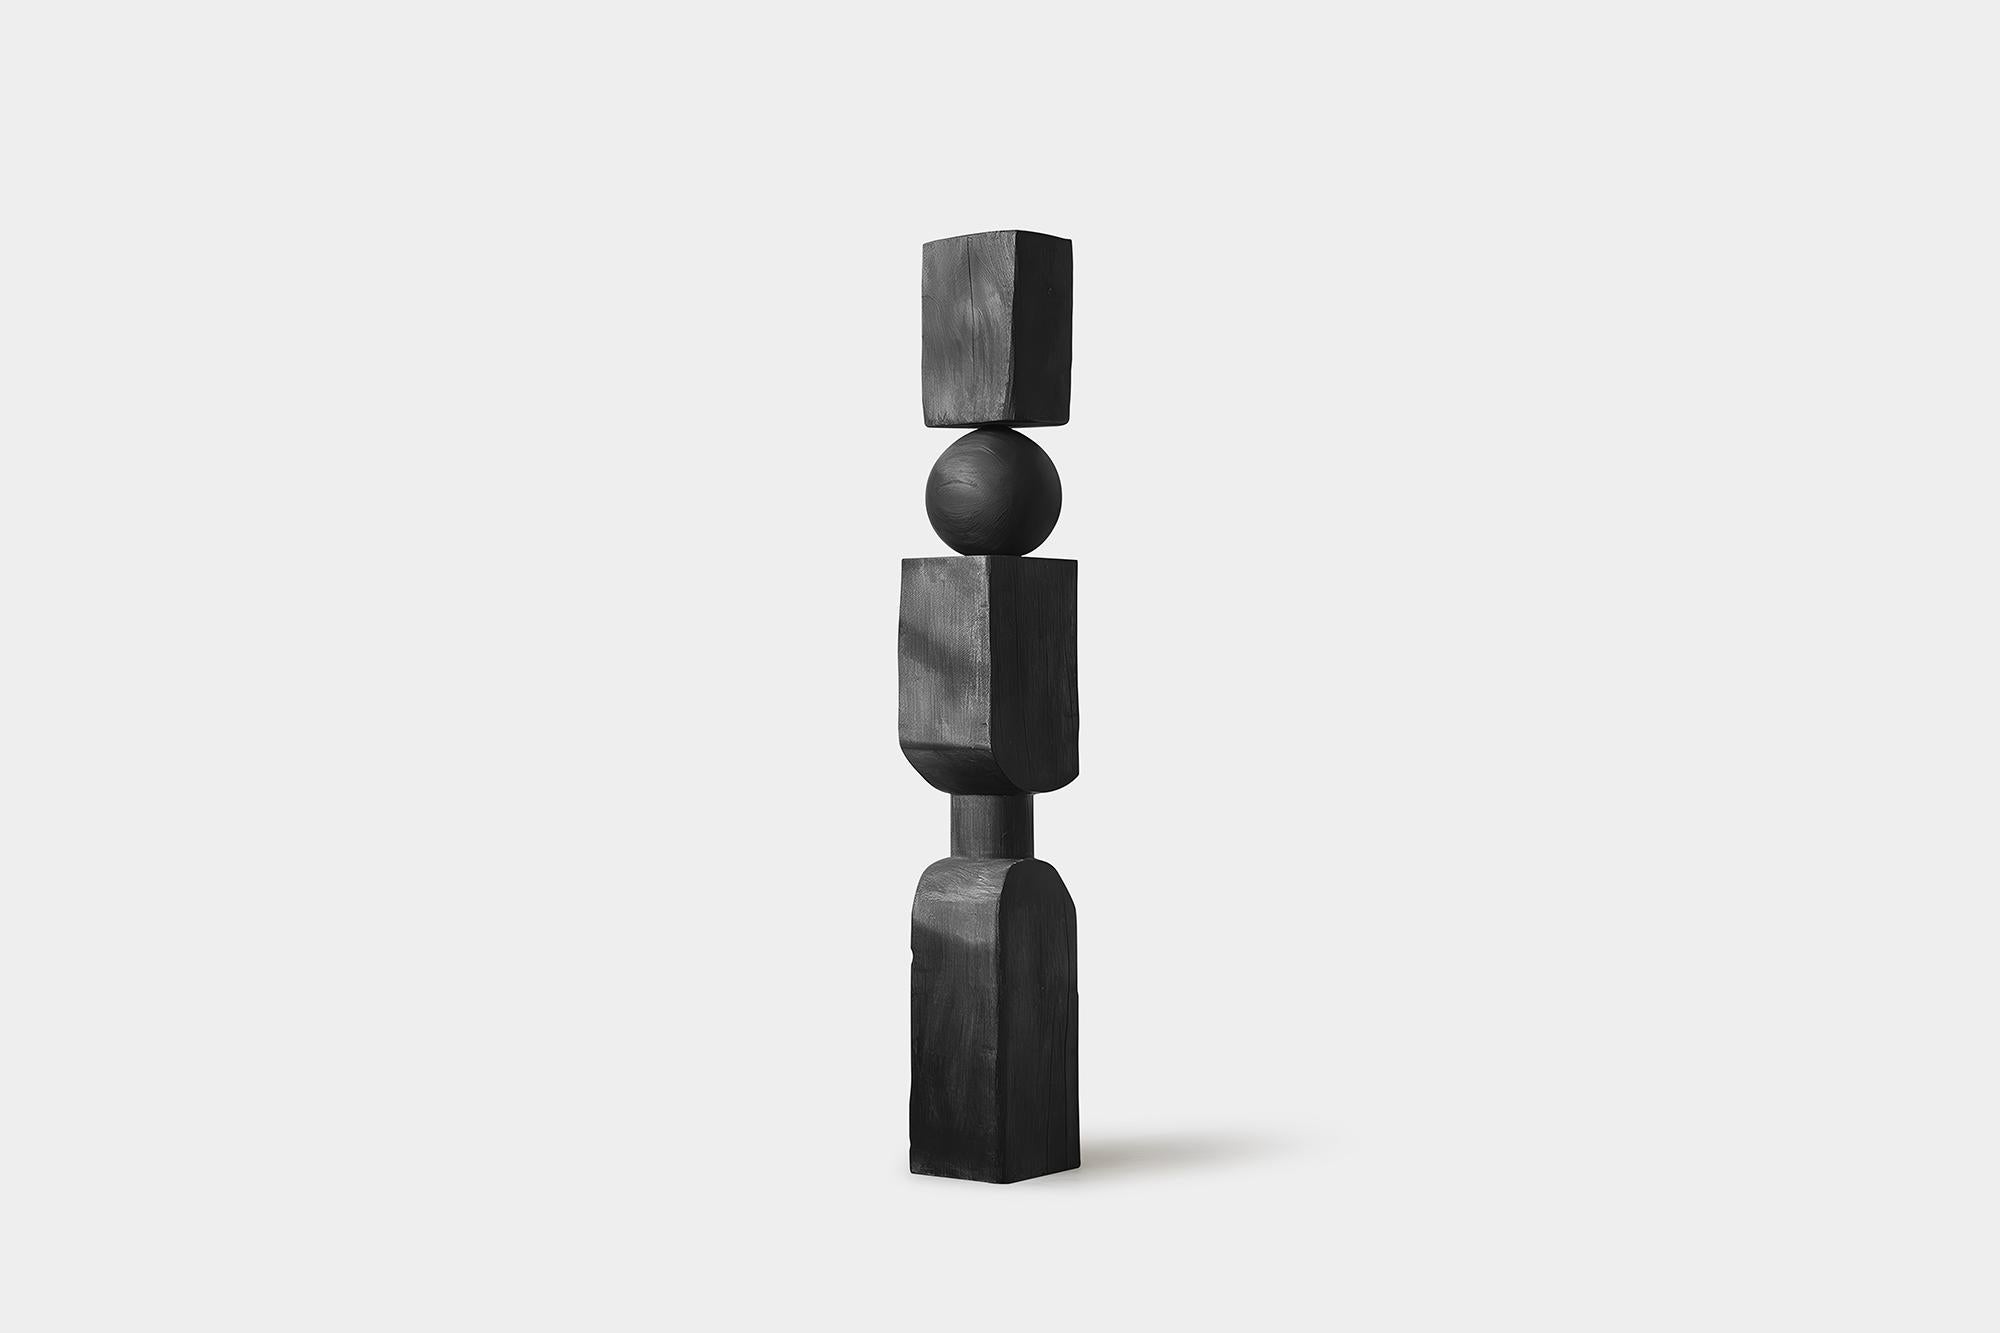 Hand-Crafted Modern Art Carved in Sleek Dark Black Solid Wood, NONO's Still Stand No99 For Sale